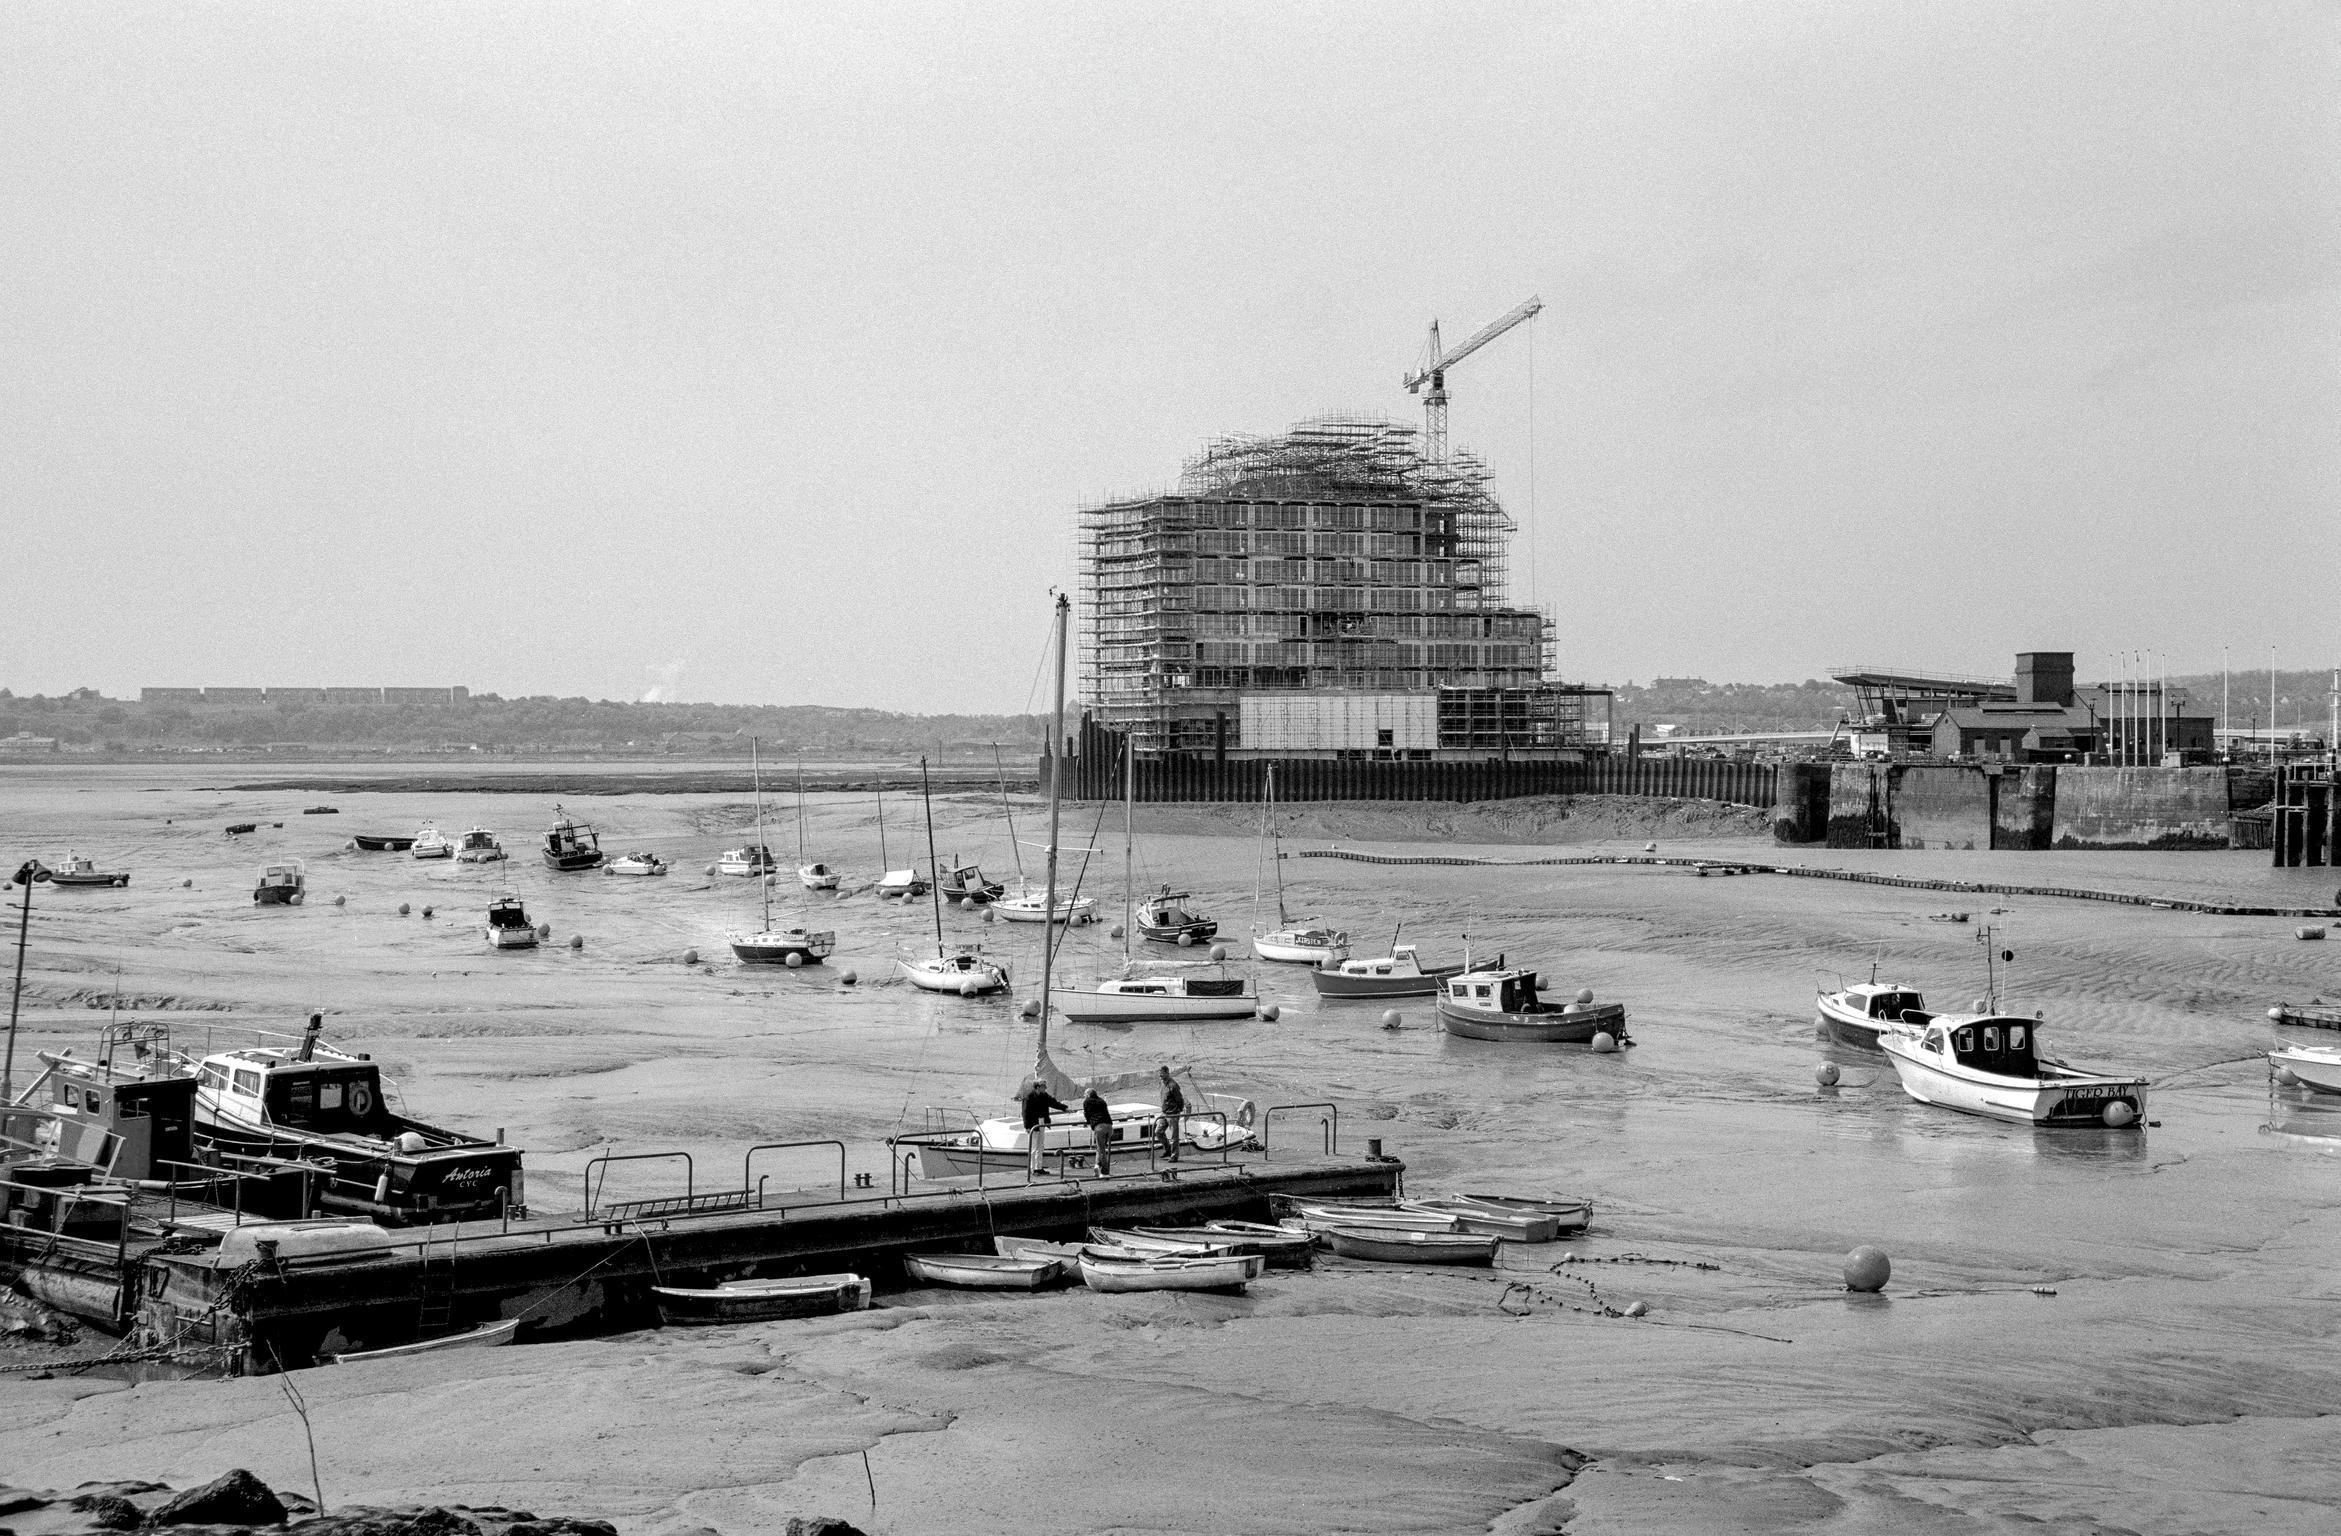 Mudflat view with the building of St David's Hotel & Spa in the distance. Cardiff, Wales